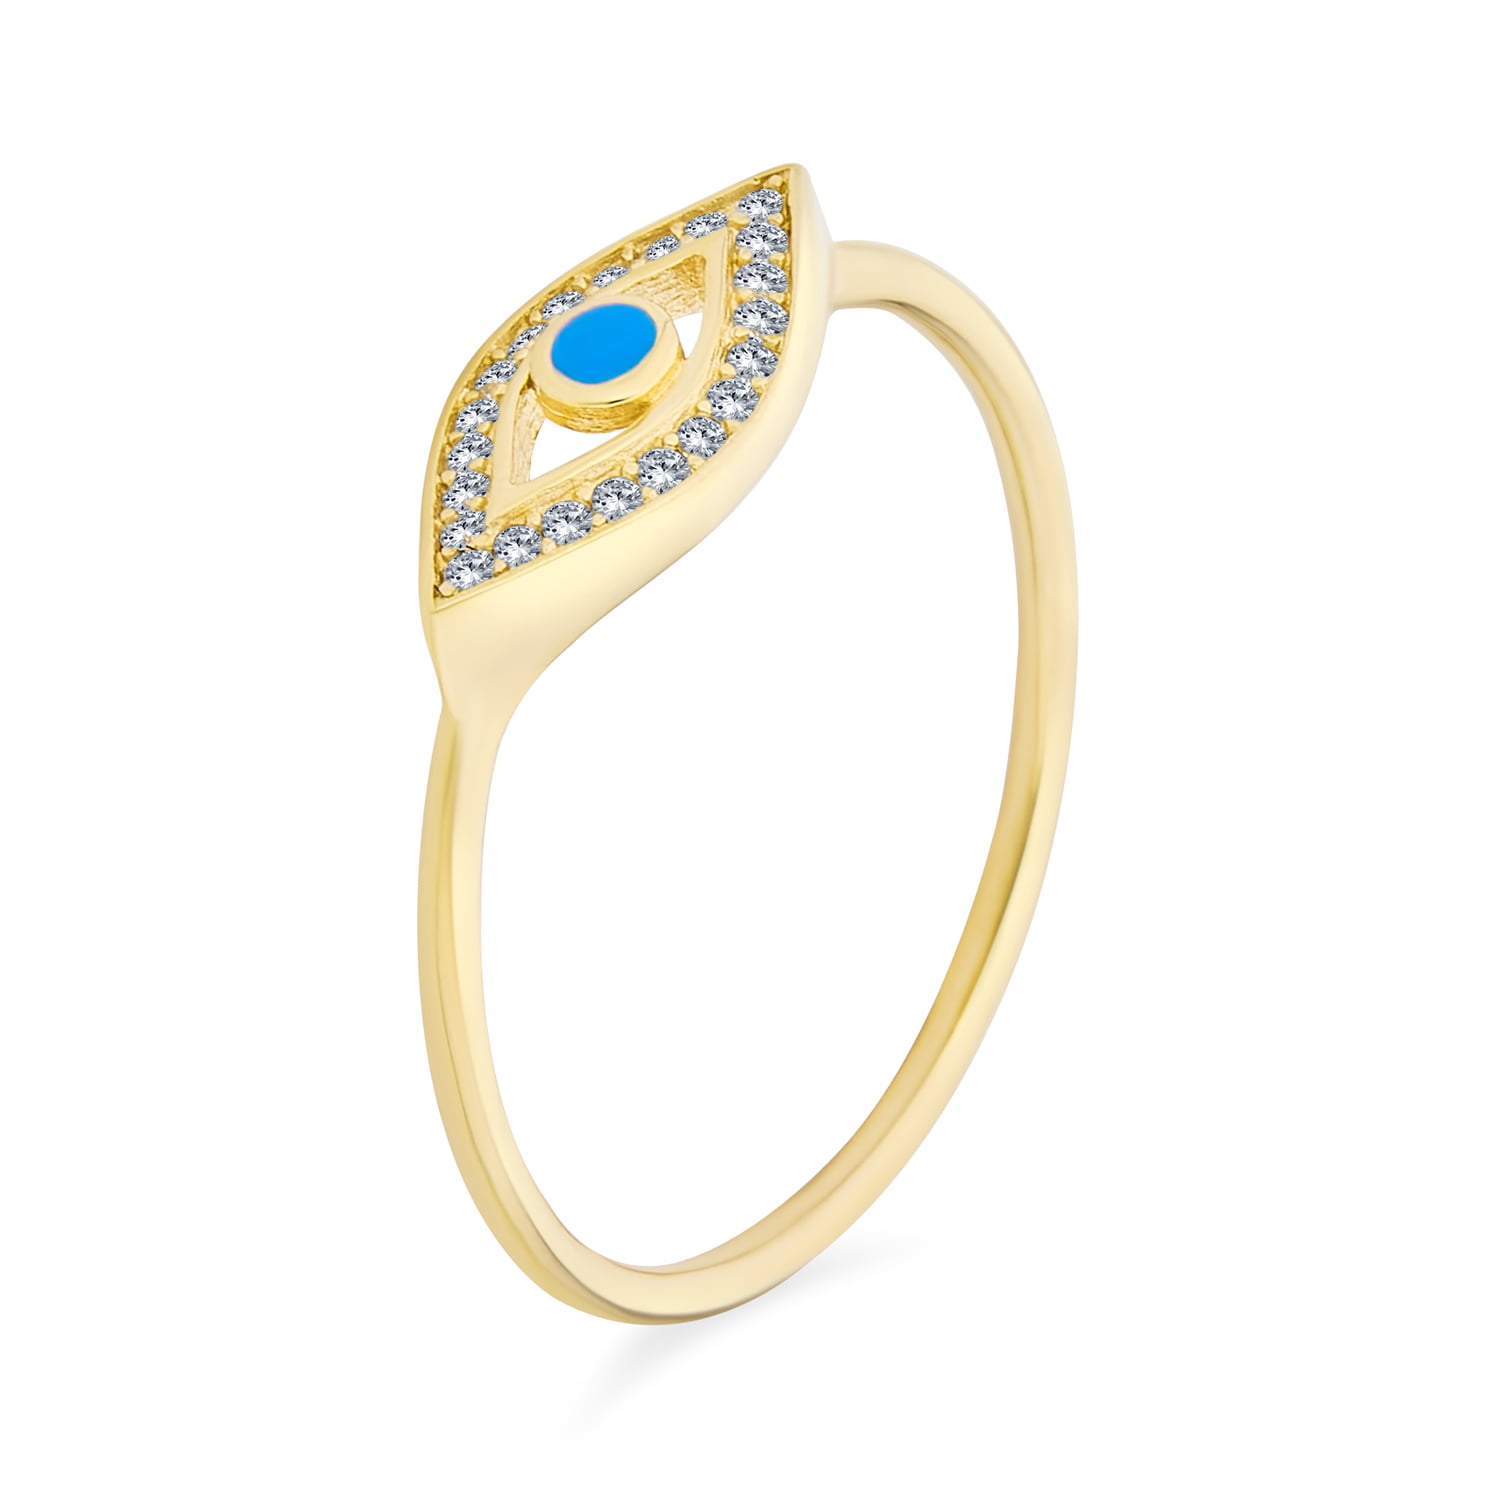 Evil Eye .925 Silver Ring Chic Ellipse Shape Turquoise Beads 18K Gold Plated USA Man Made Super  Trendy